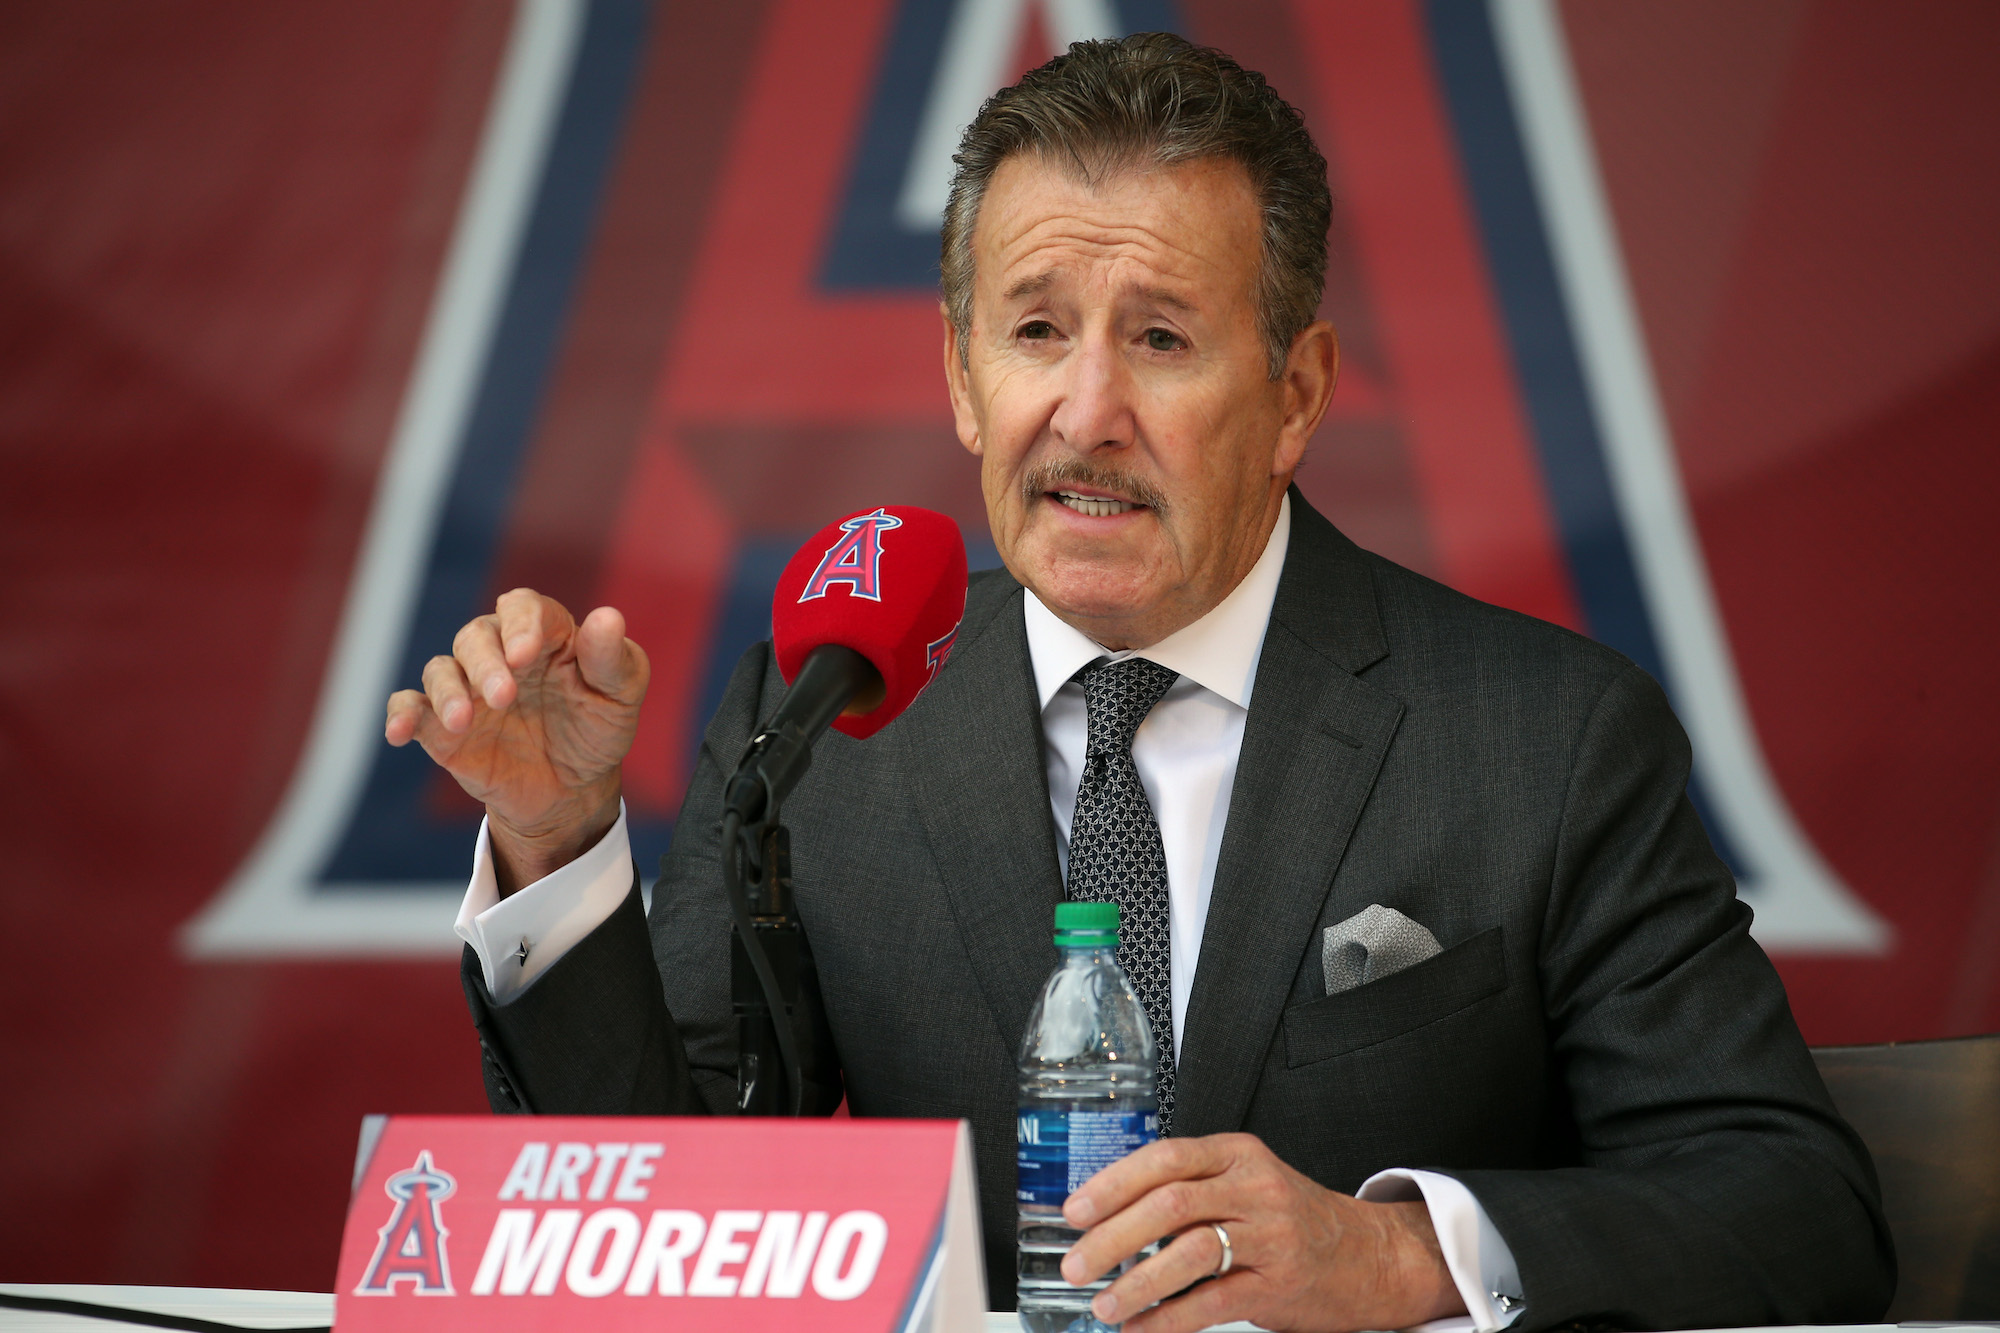 ANAHEIM, CA - DECEMBER 14: Los Angeles Angels owner Arte Moreno answers questions during a press conference to introduce Anthony Rendon at Angel Stadium of Anaheim on December 14, 2019 in Anaheim, CA. (Photo by Kiyoshi Mio/Icon Sportswire via Getty Images)